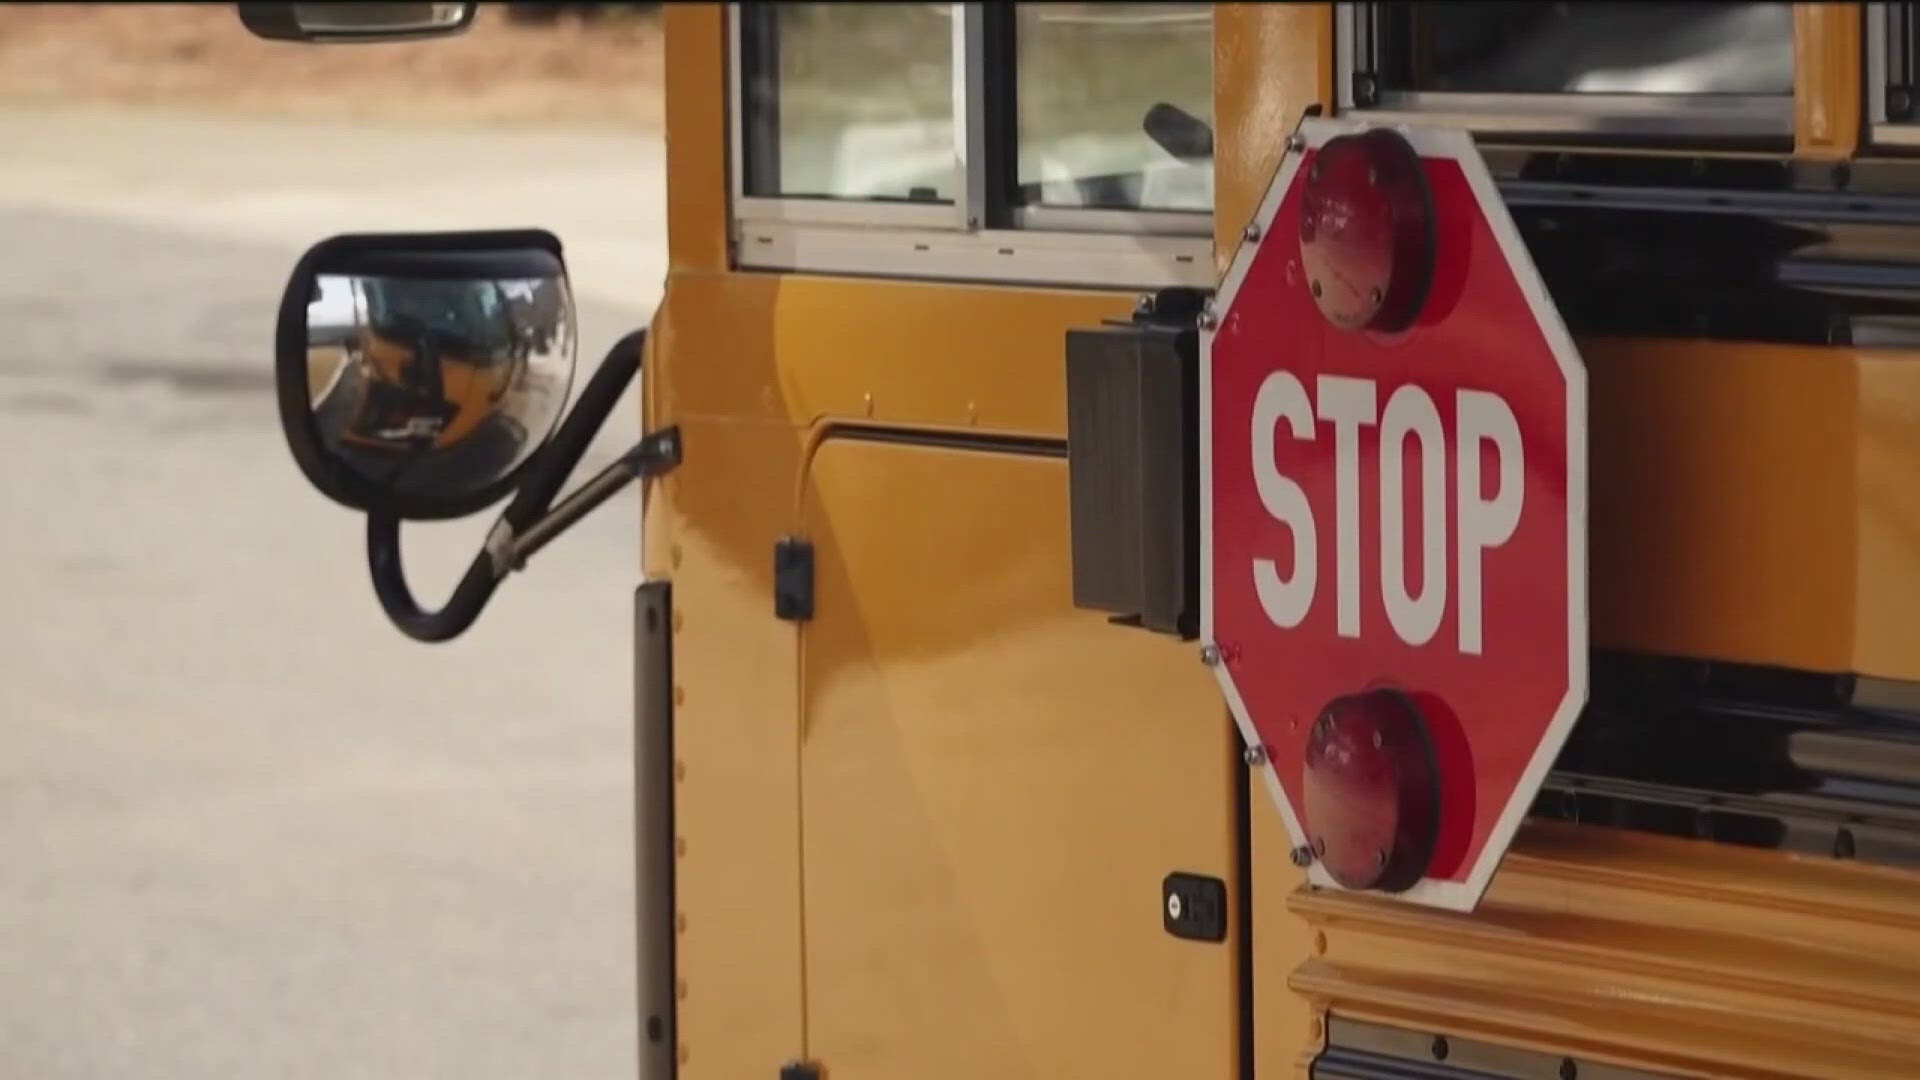 Georgia's fine for passing a school bus is among the toughest in the nation.